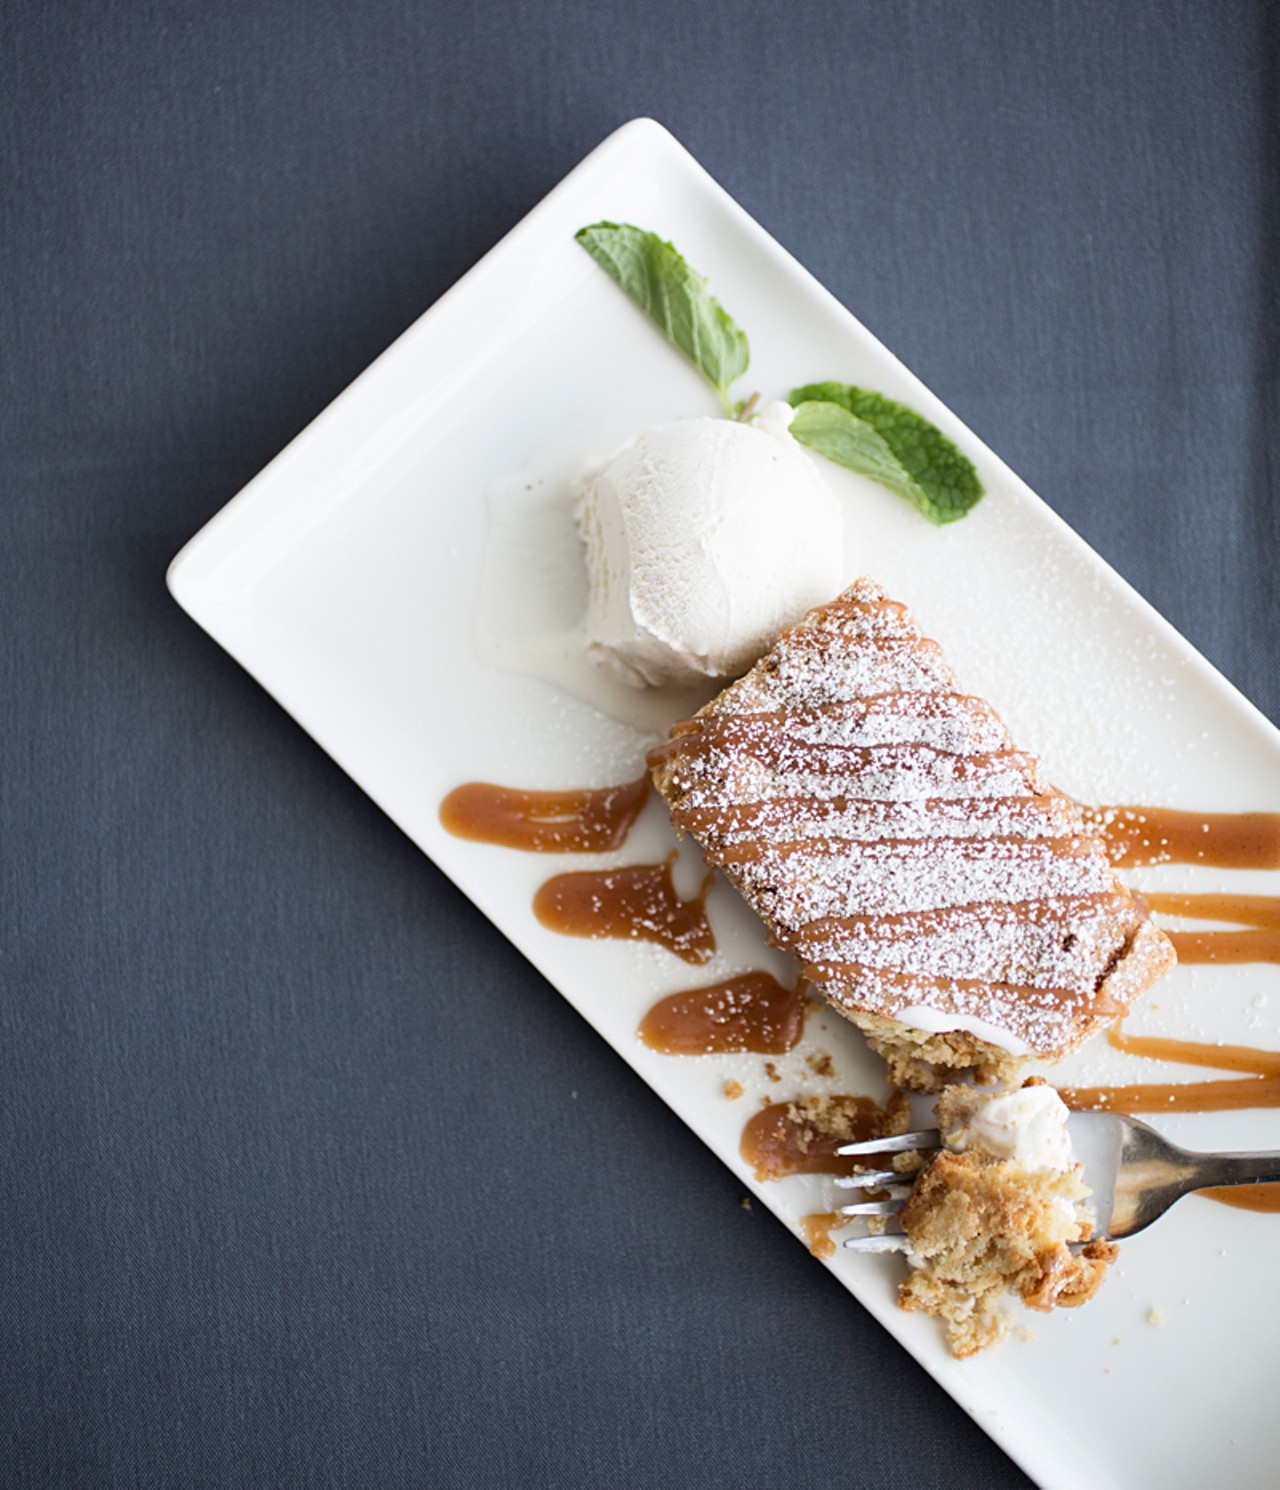 For dessert, a warm blondie made with Serendipity vanilla ice cream and salted caramel sauce.